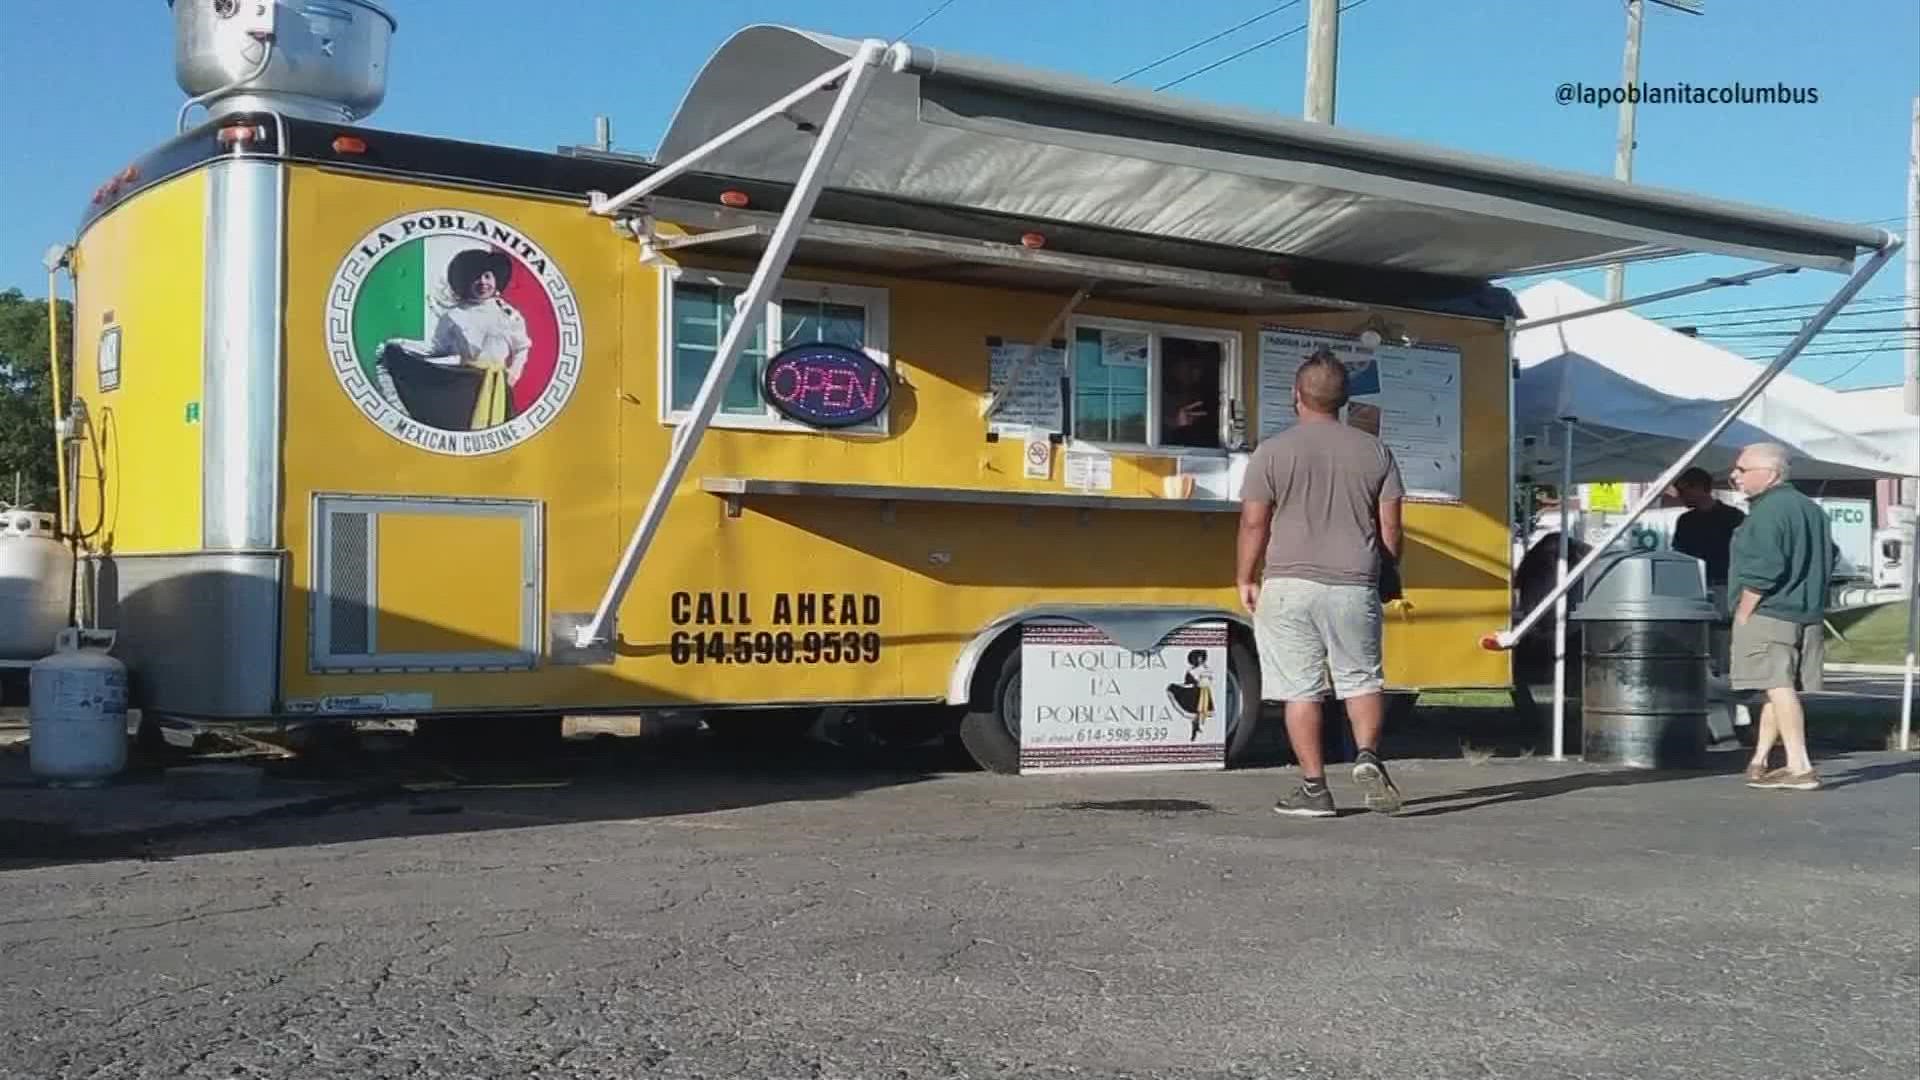 For restaurants on wheels, the high price of gas is forcing owners to make some changes.